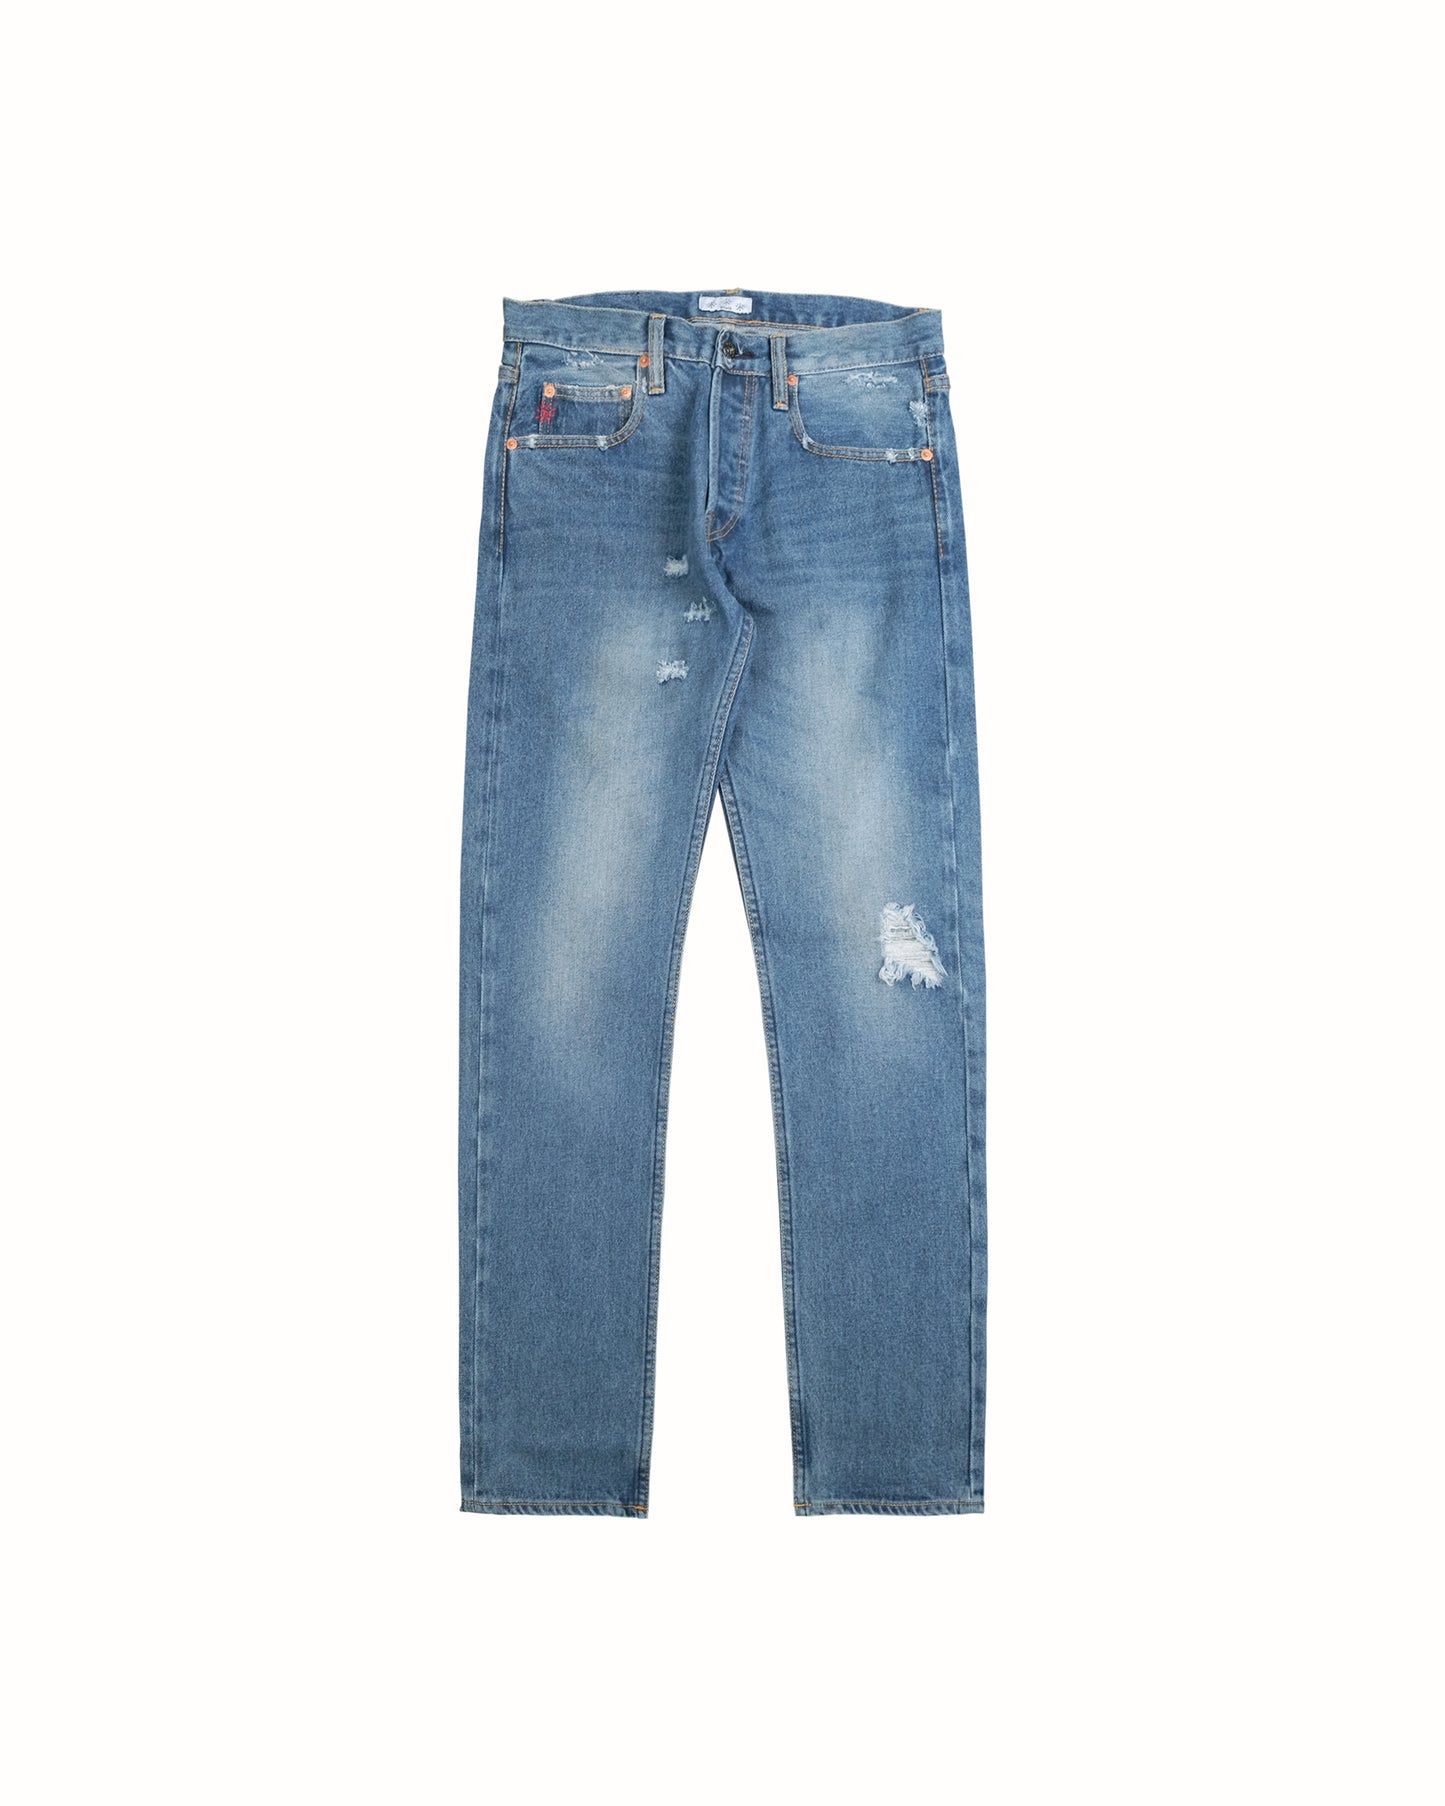 Knight West Jeans - Distressed Washed